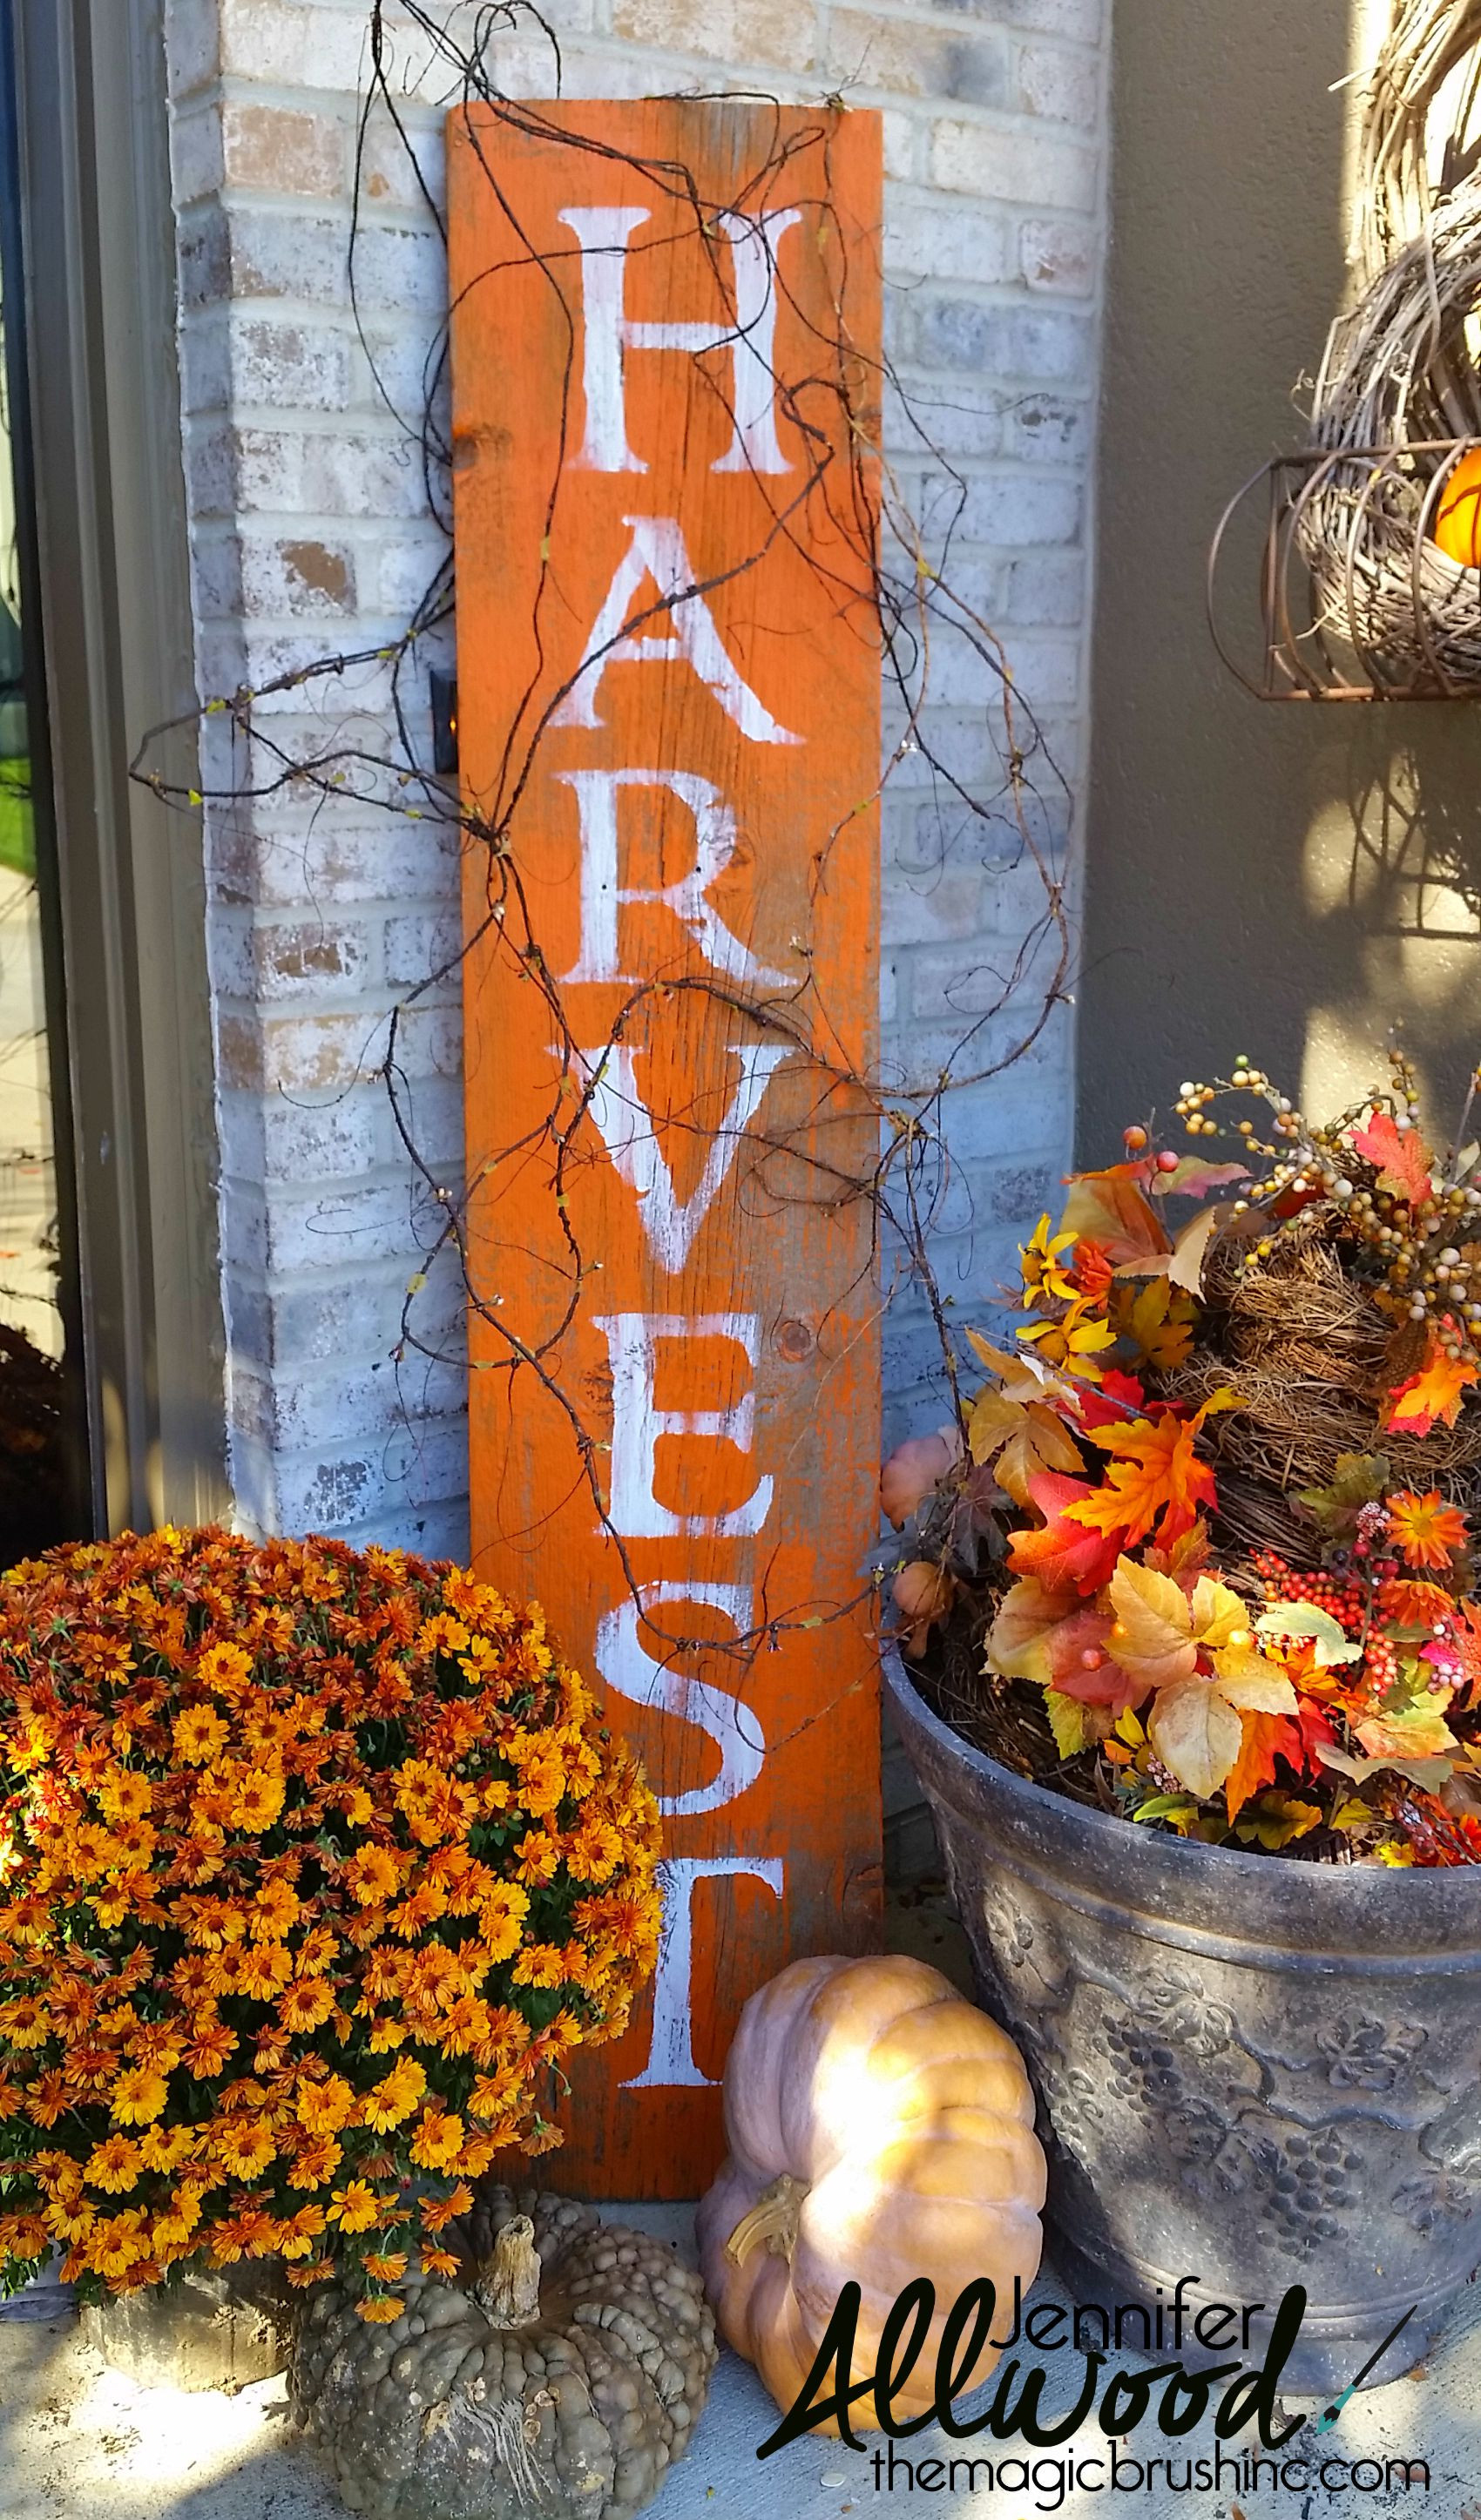 Porch Fall Decorating Ideas
 Harvest Sign on Barnwood for Fall Front Porch Decor